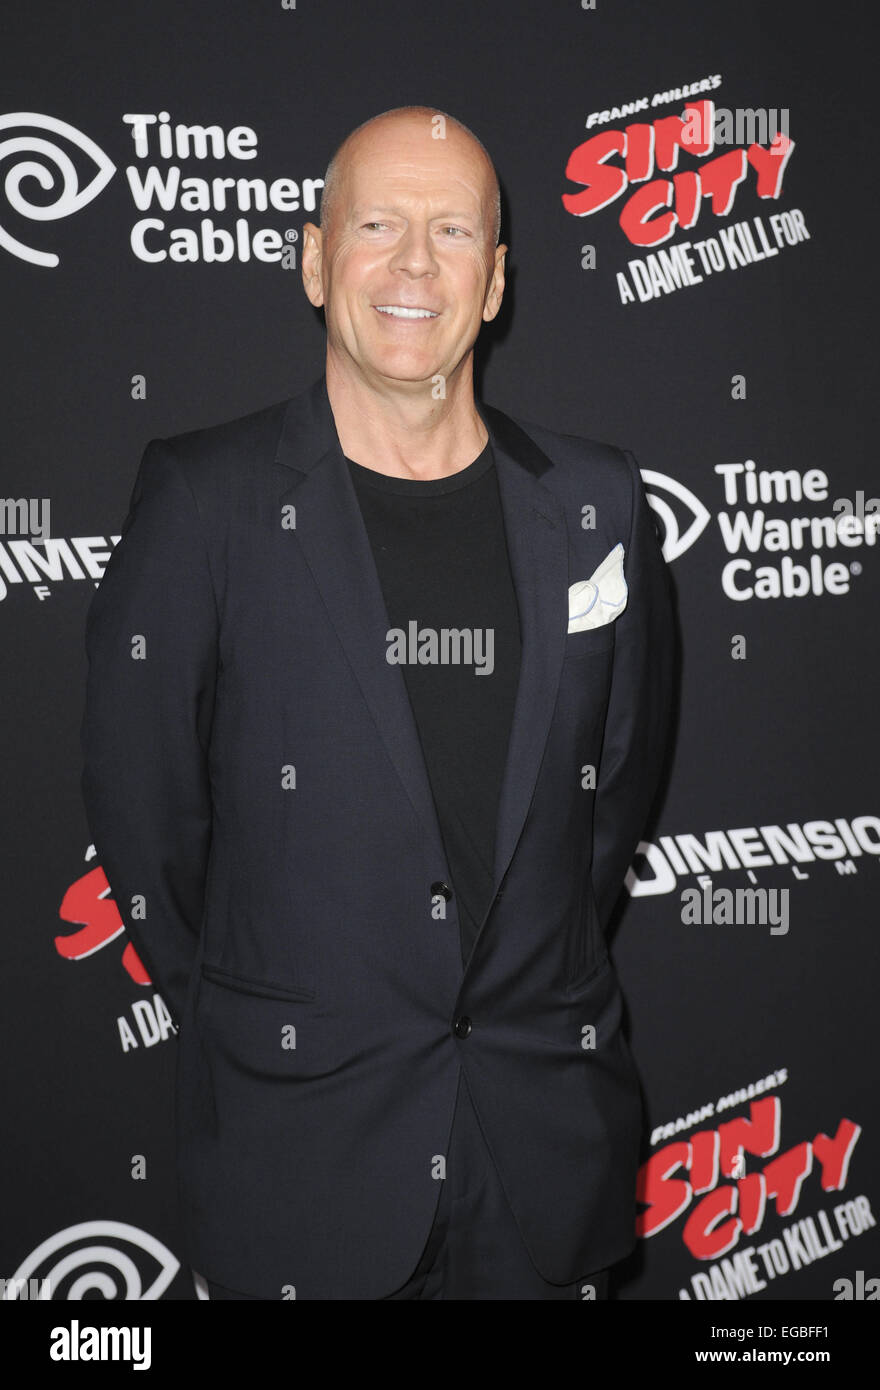 Los Angeles premiere of 'Sin City: A Dame to Kill For' held at the TCL Chinese Theatre Featuring: Bruce Willis Where: Los Angeles, California, United States When: 19 Aug 2014 Stock Photo